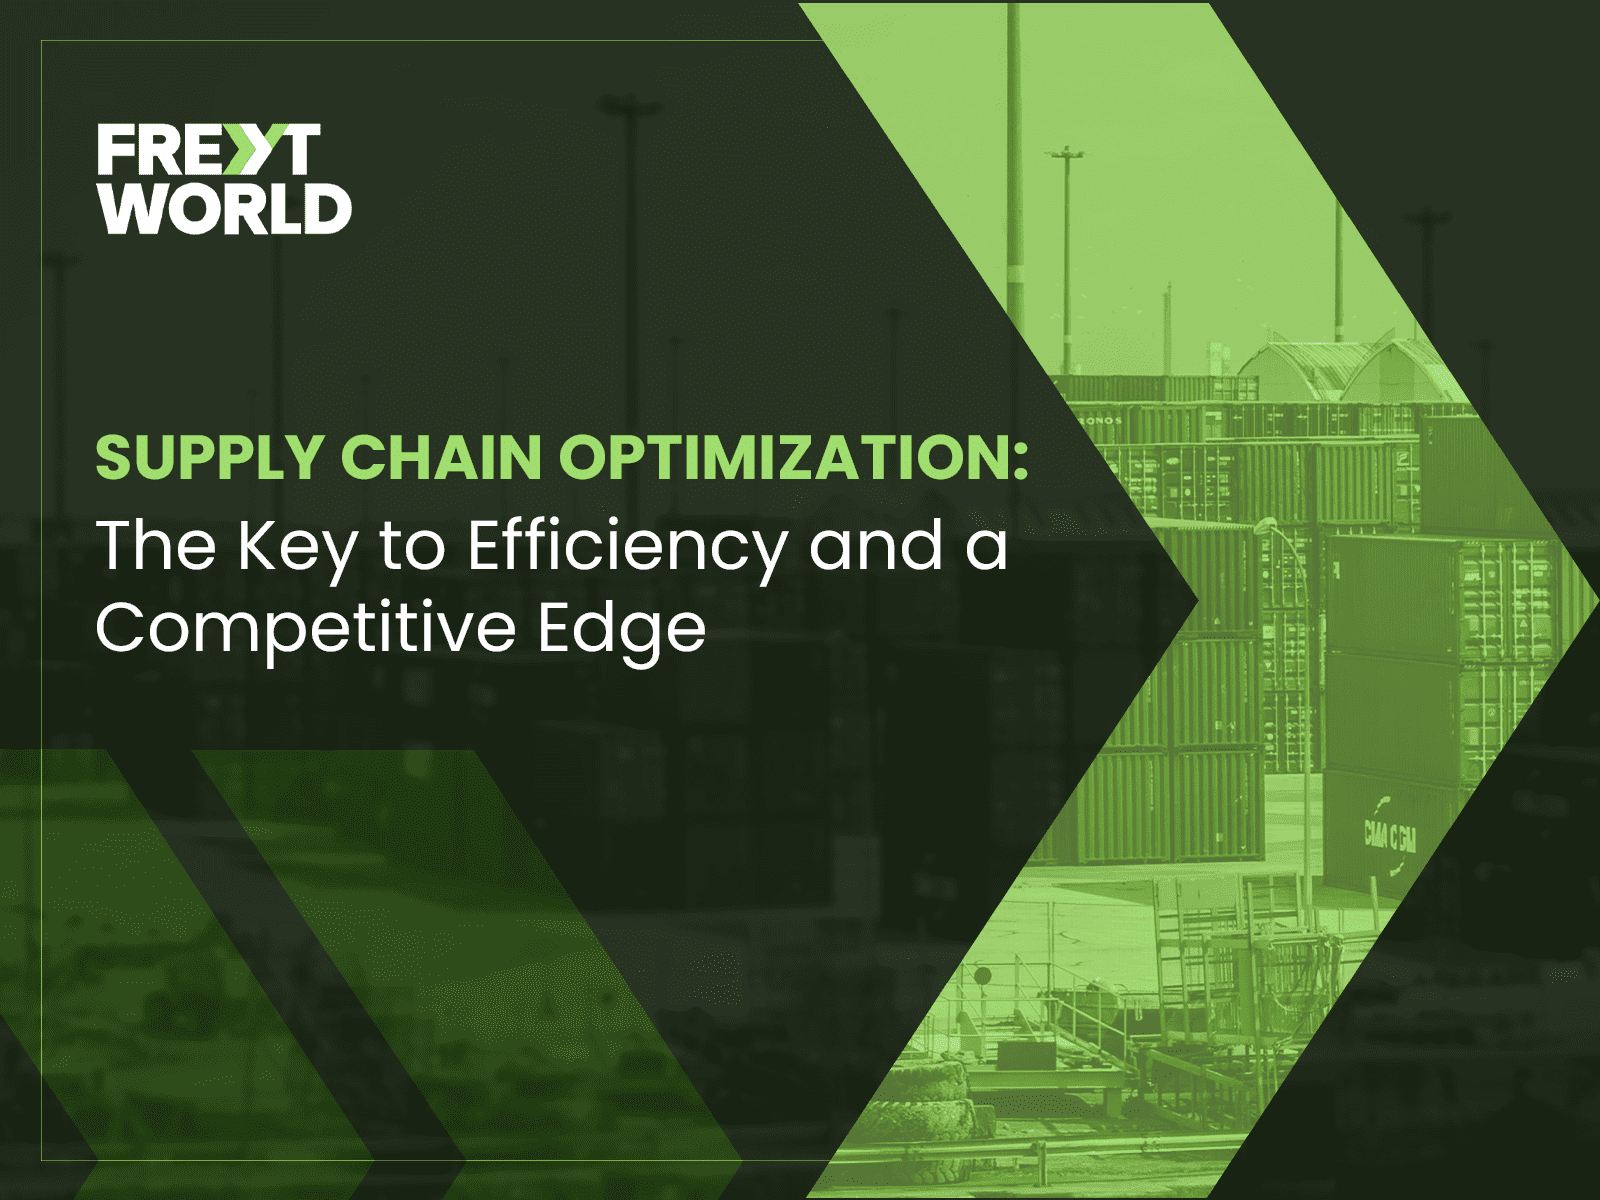 Supply Chain Optimization: The Key to Efficiency and a Competitive Edge